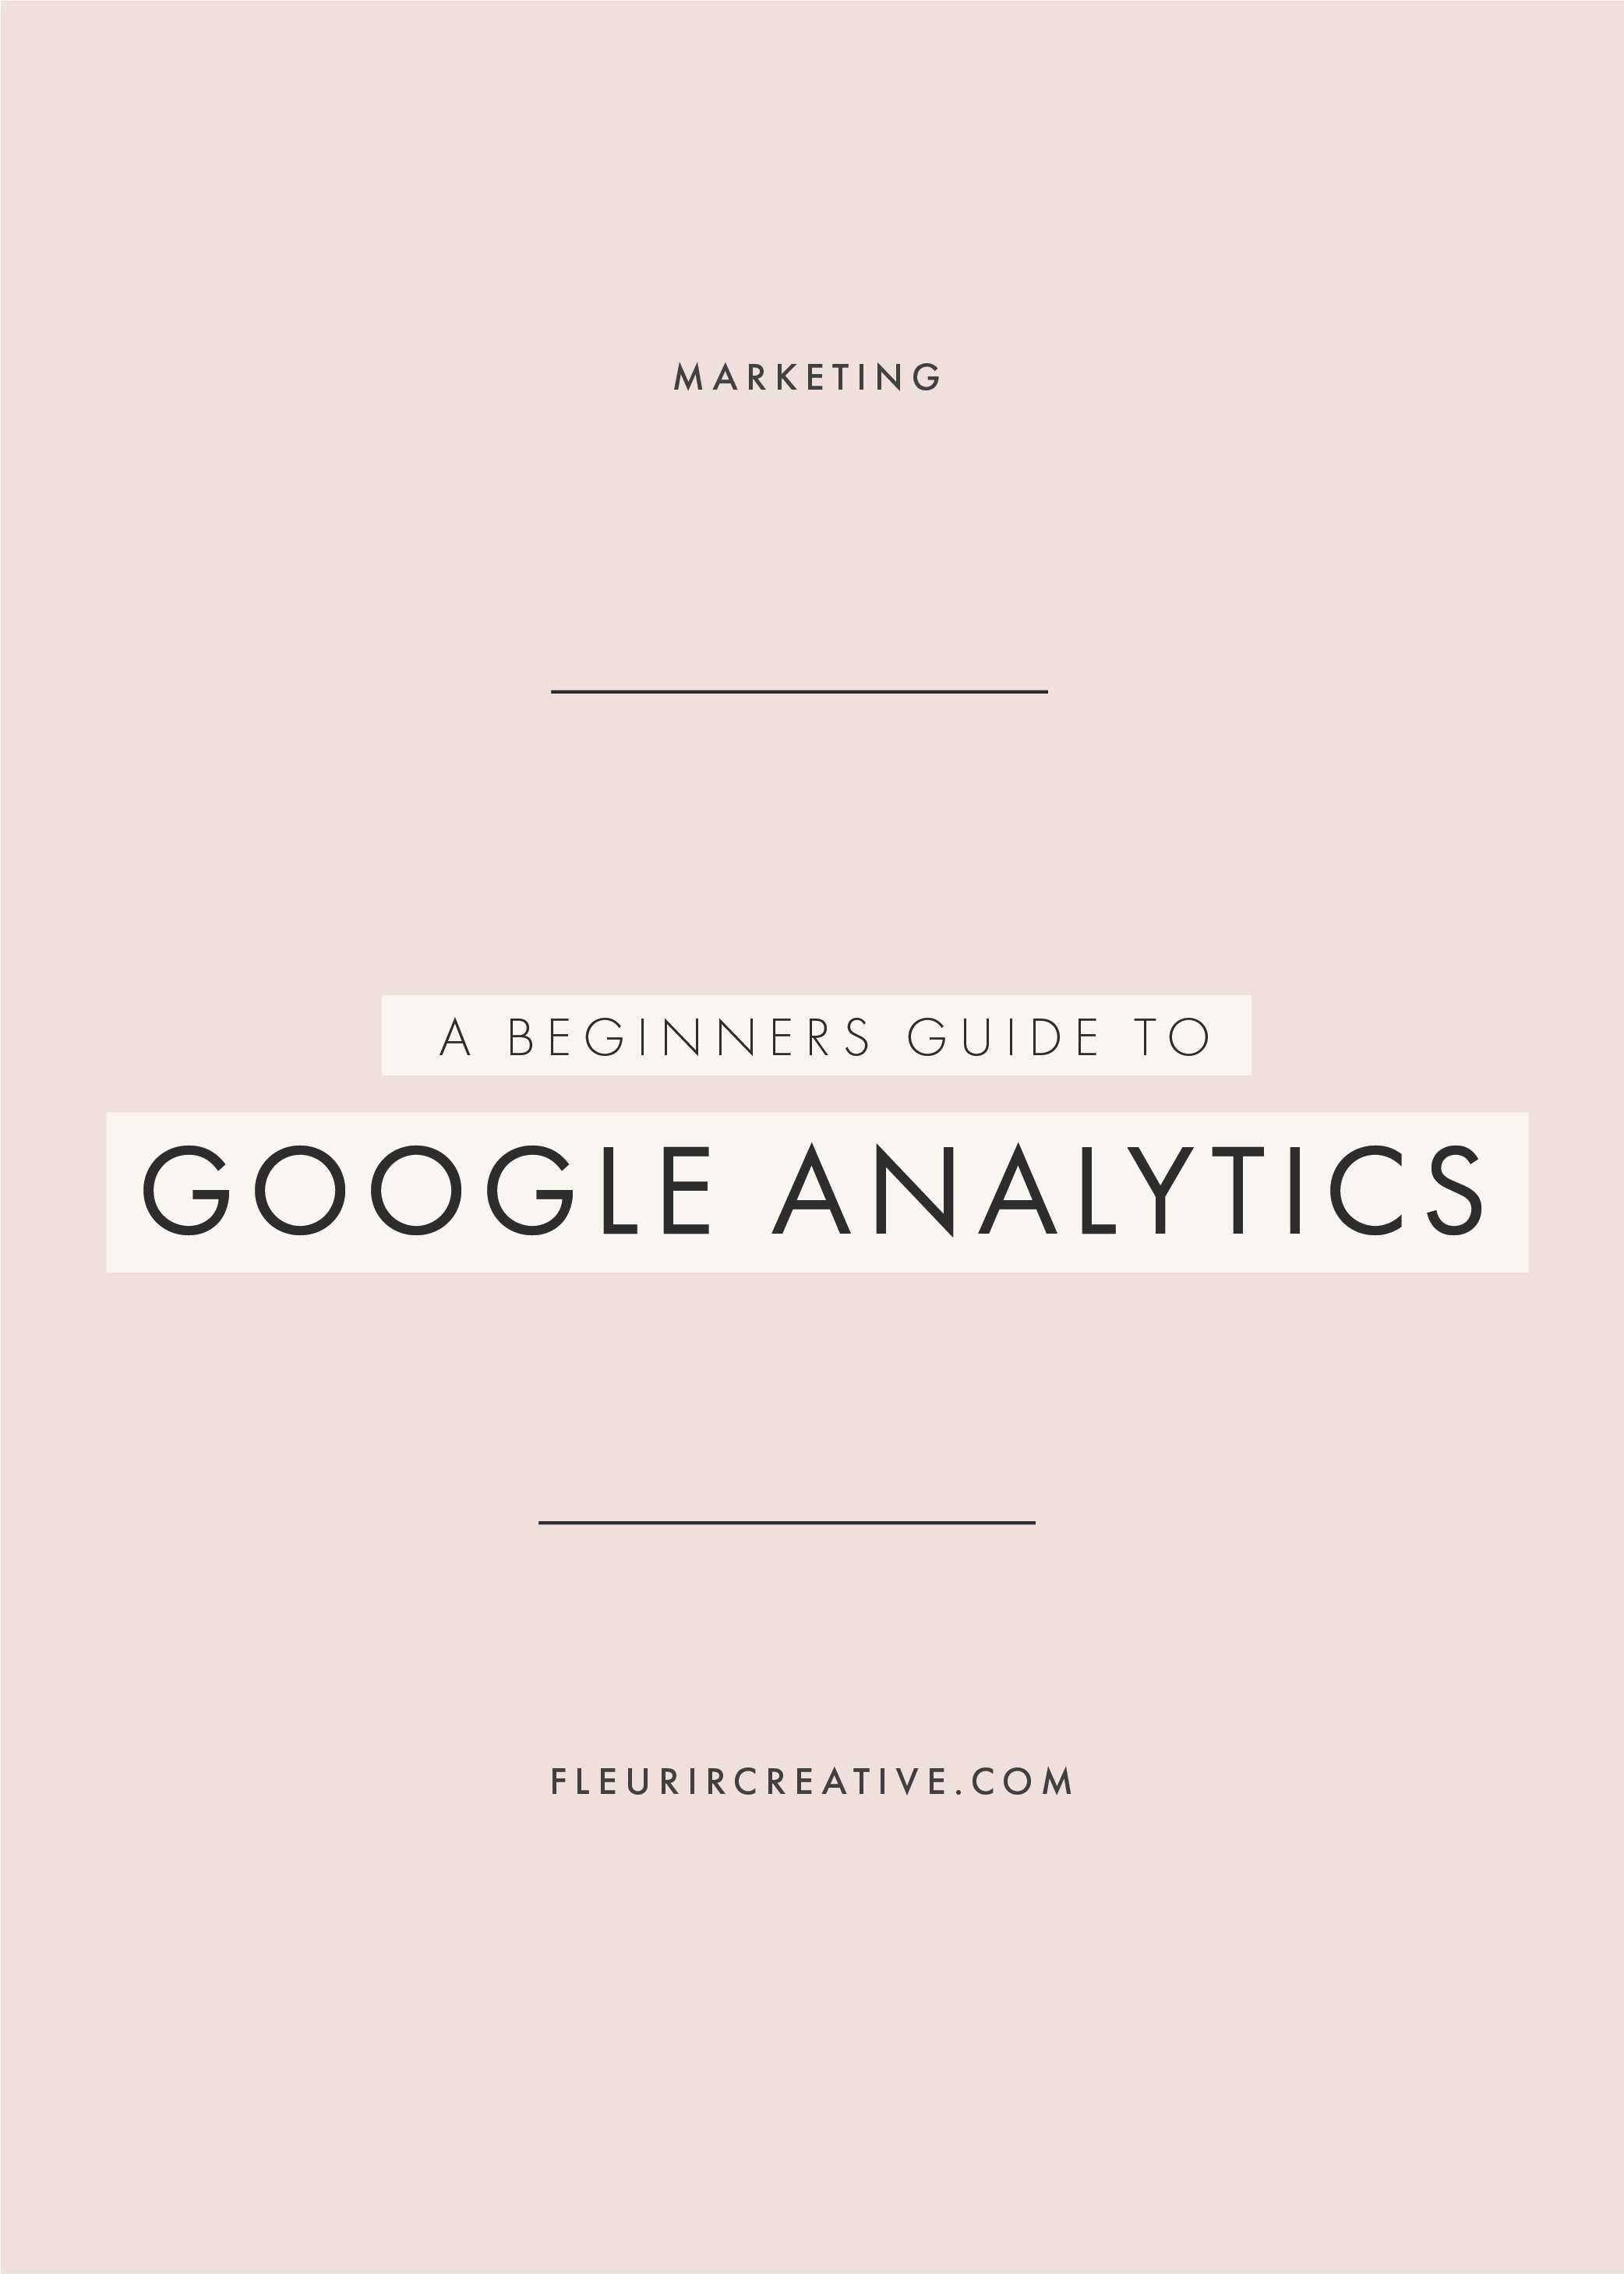 A Beginners Guide to Google Analytics